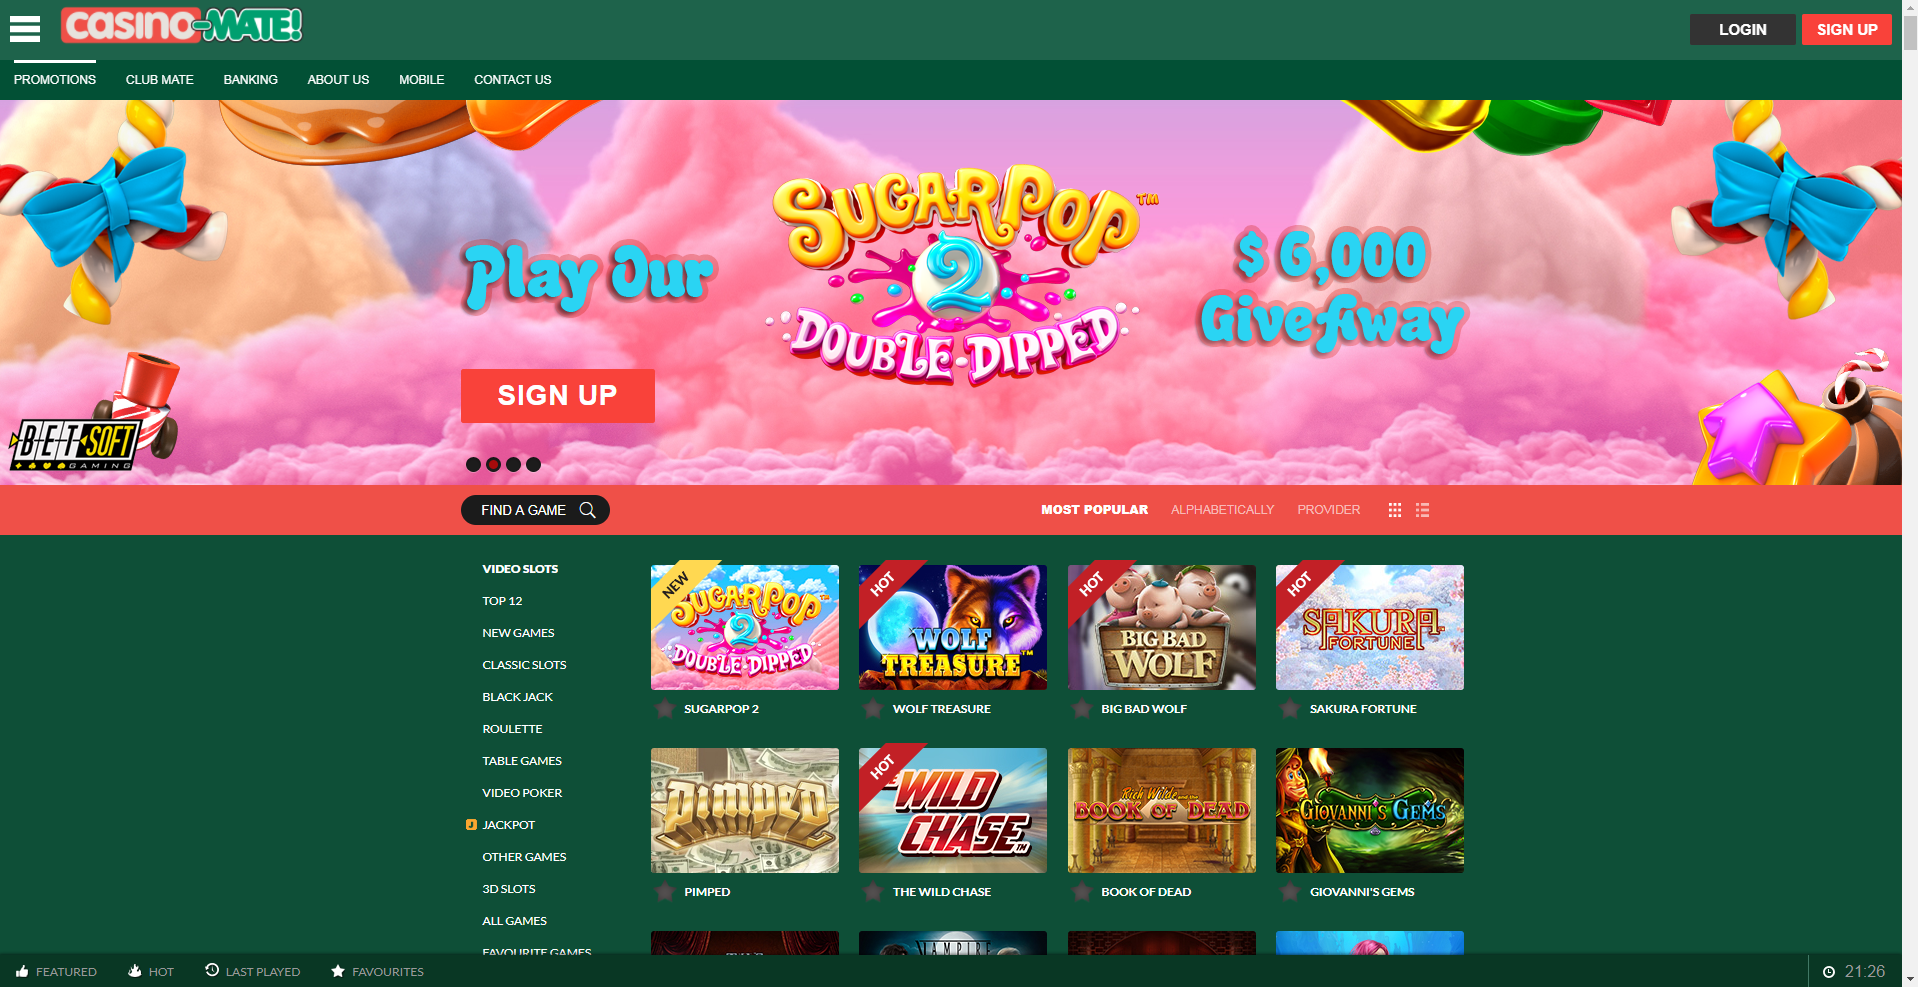 Five Rookie cosmo casino nz Mistakes You Can Fix Today